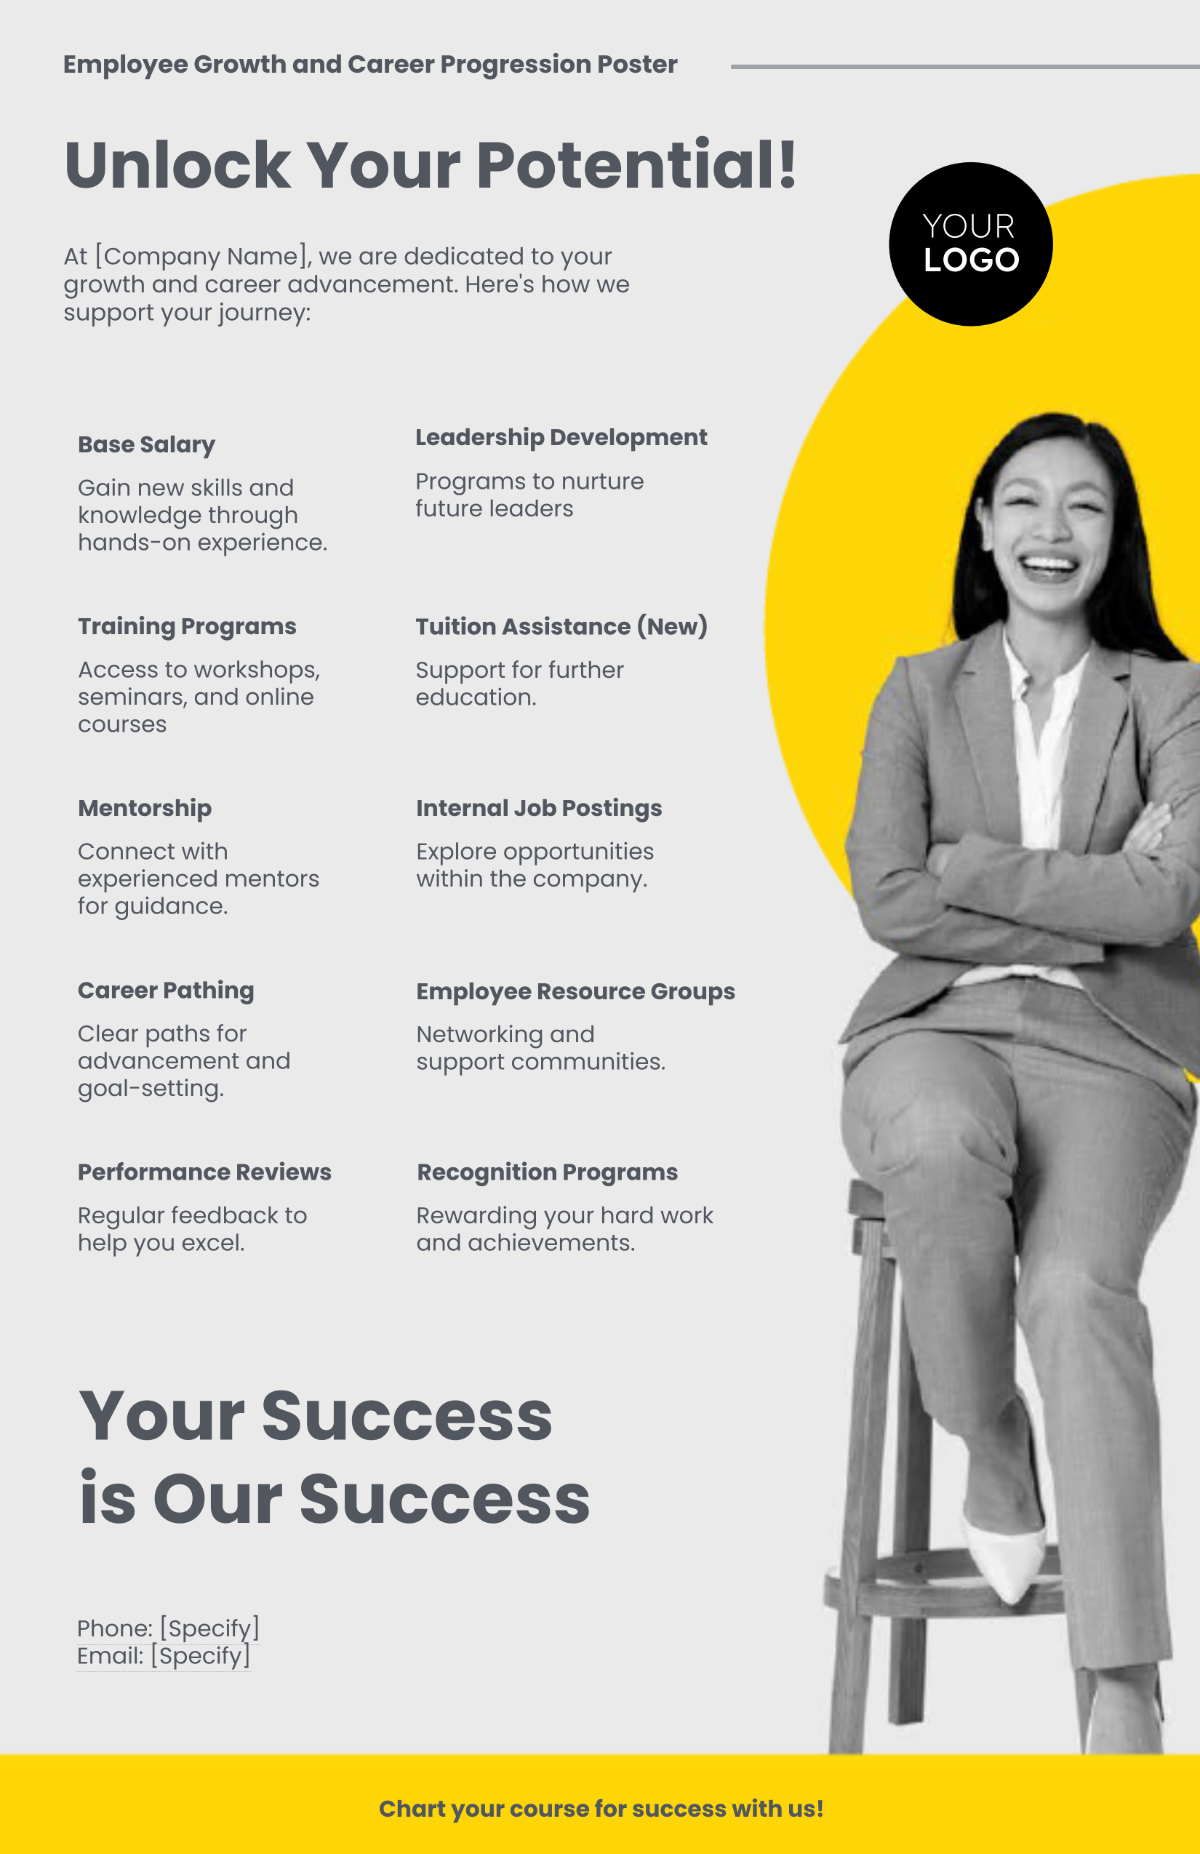 Employee Growth and Career Progression Poster HR Template